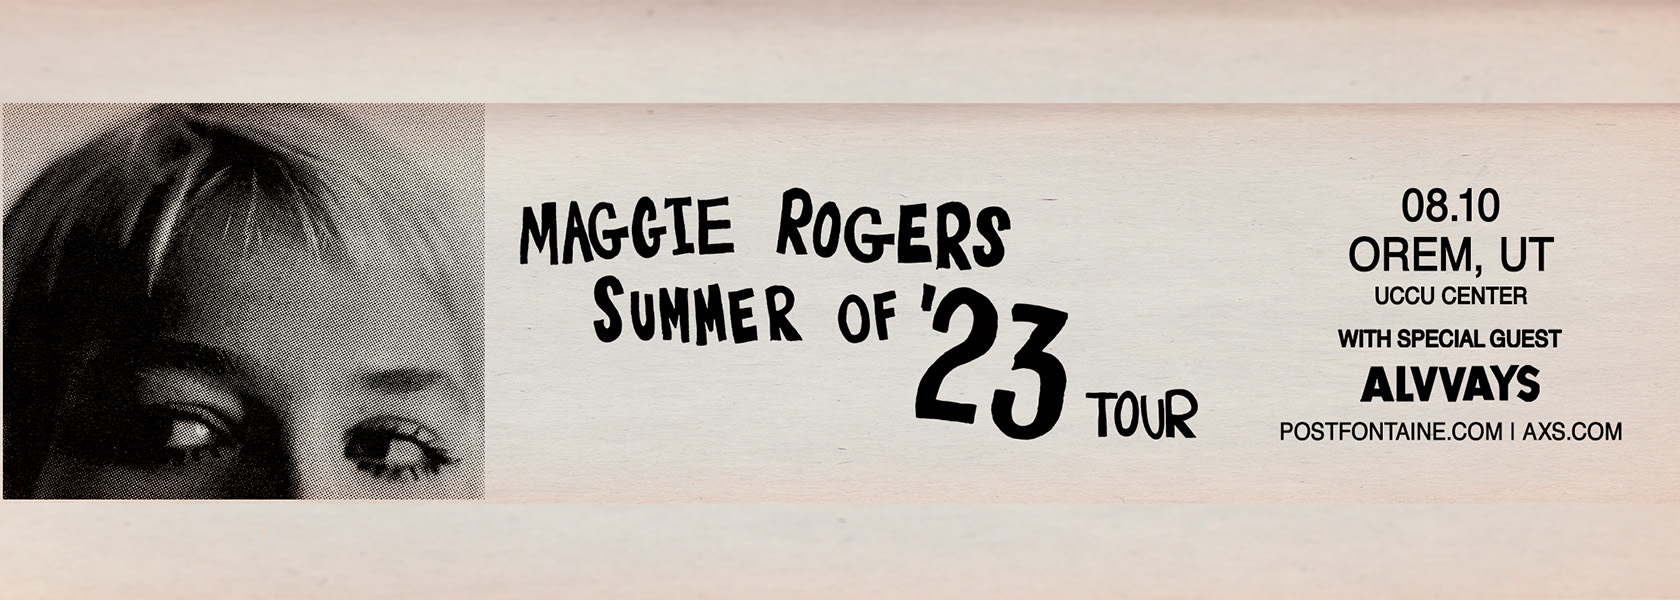 Maggie Rogers Summer of '23 Tour